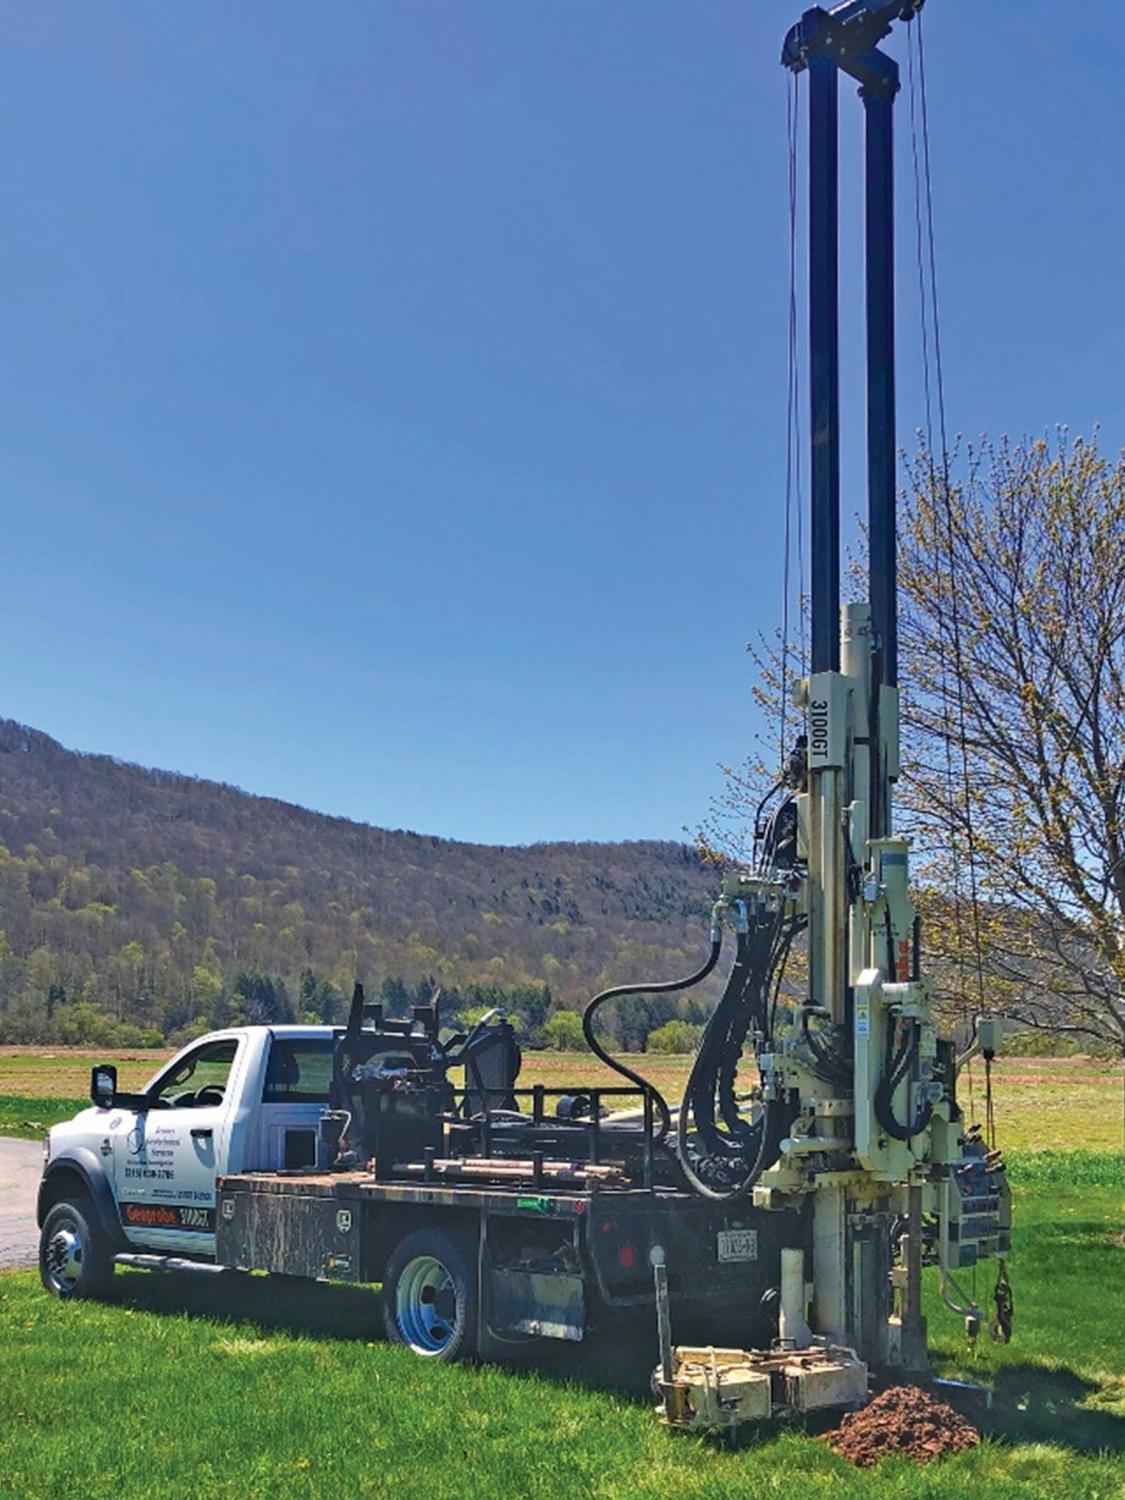 3100GT provides performance for common geotechnical sampling without the need for a class A/B CDL, expanding pool of potential new drillers. 